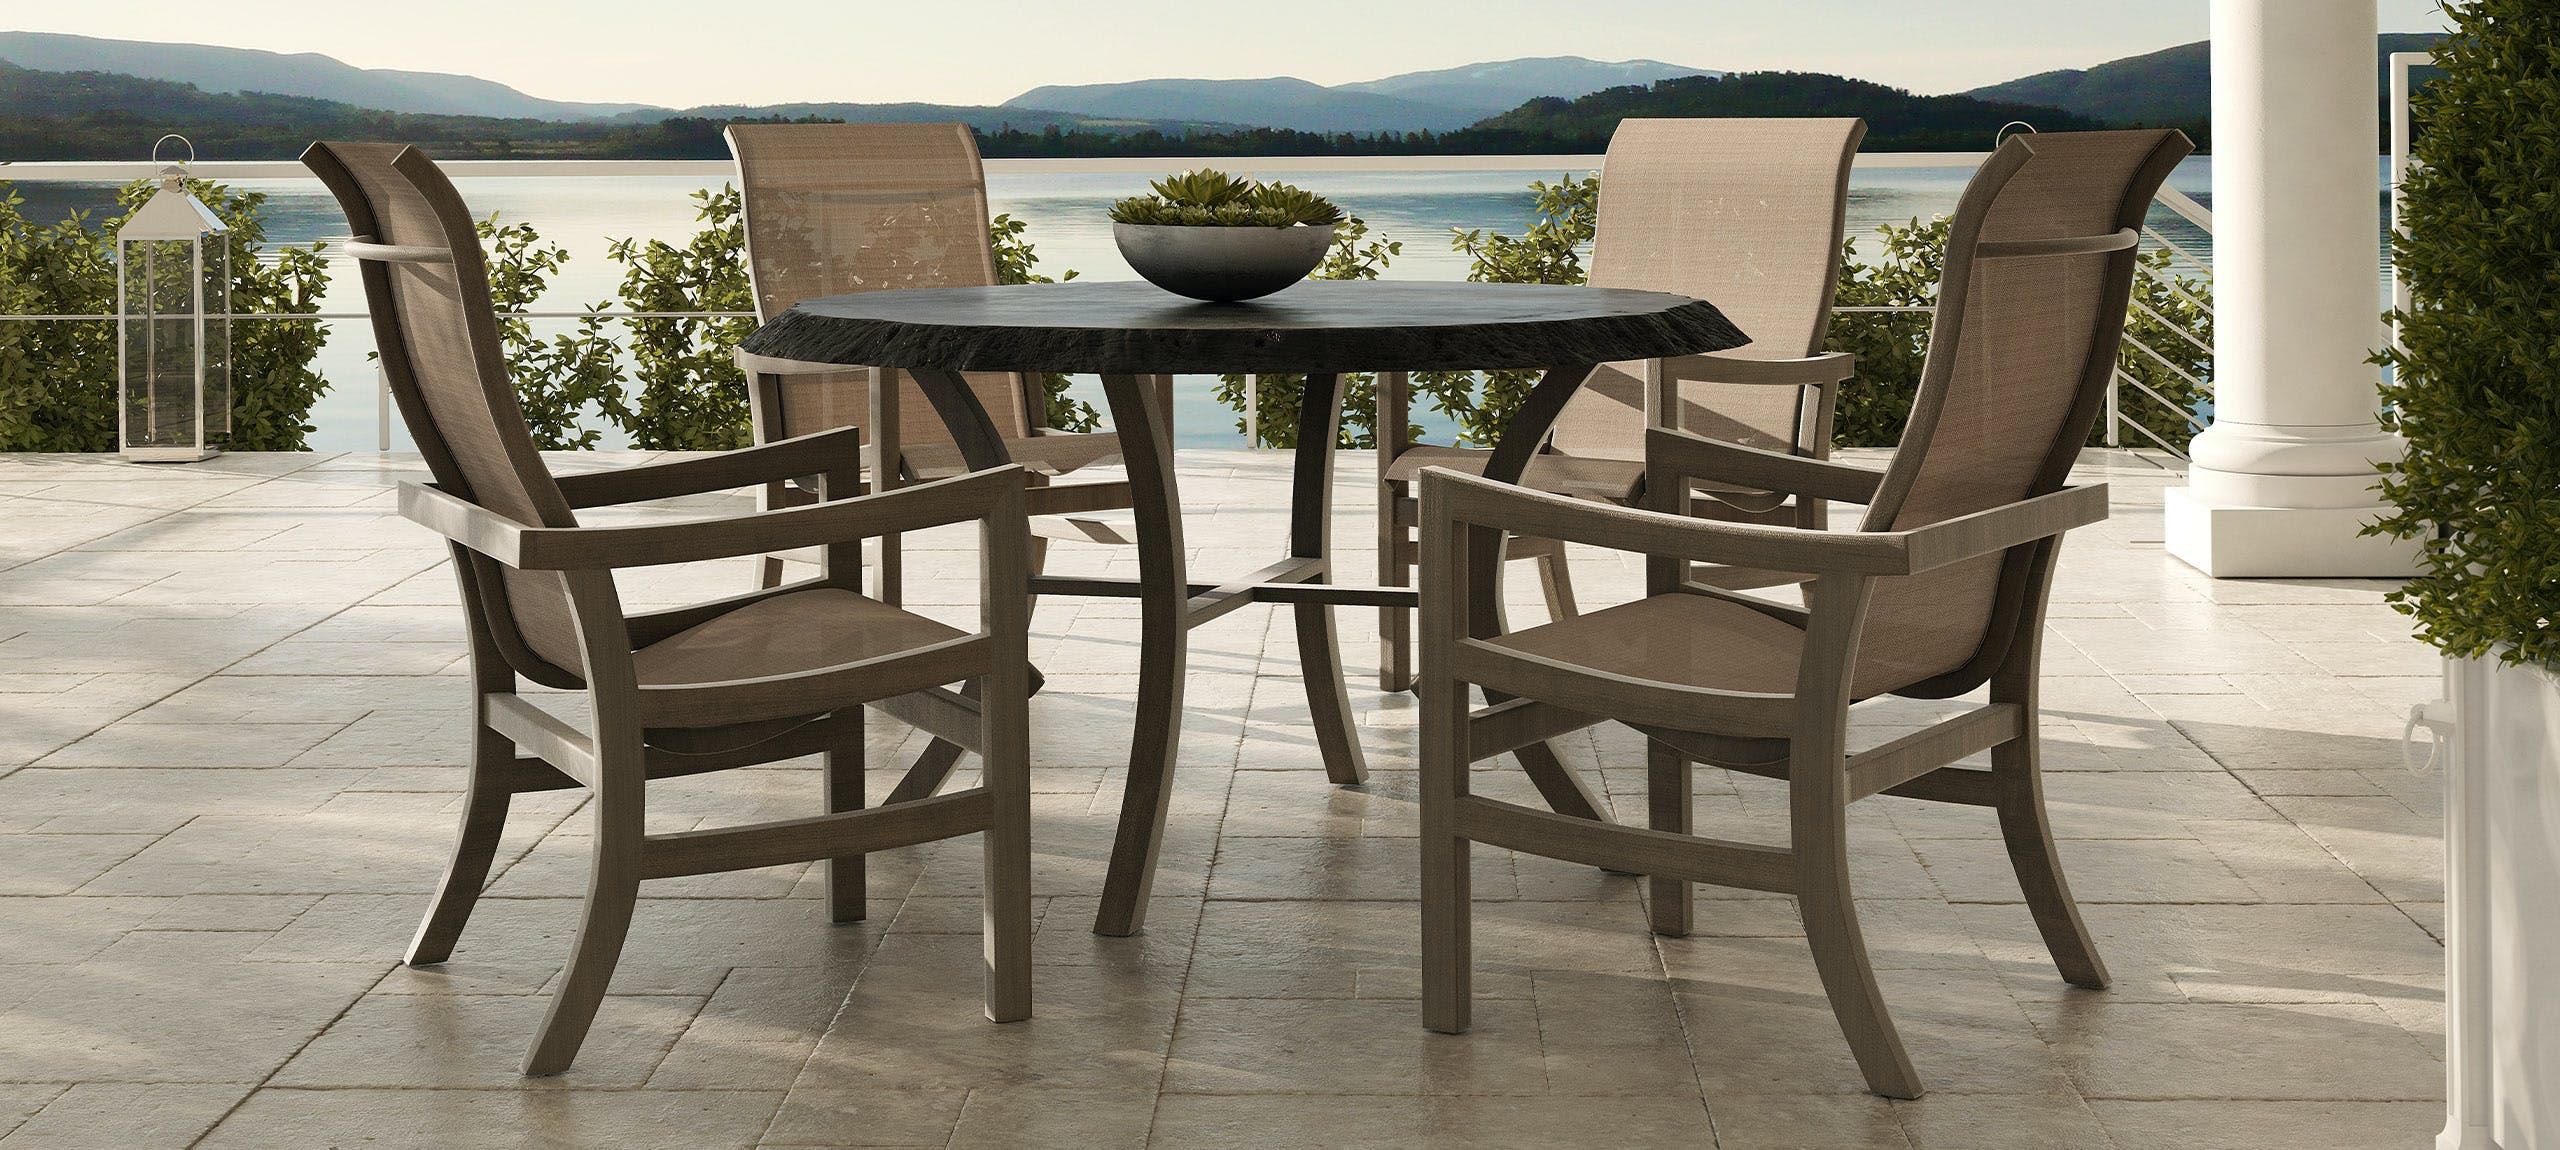 Roma Sling Dining Chair By Castelle